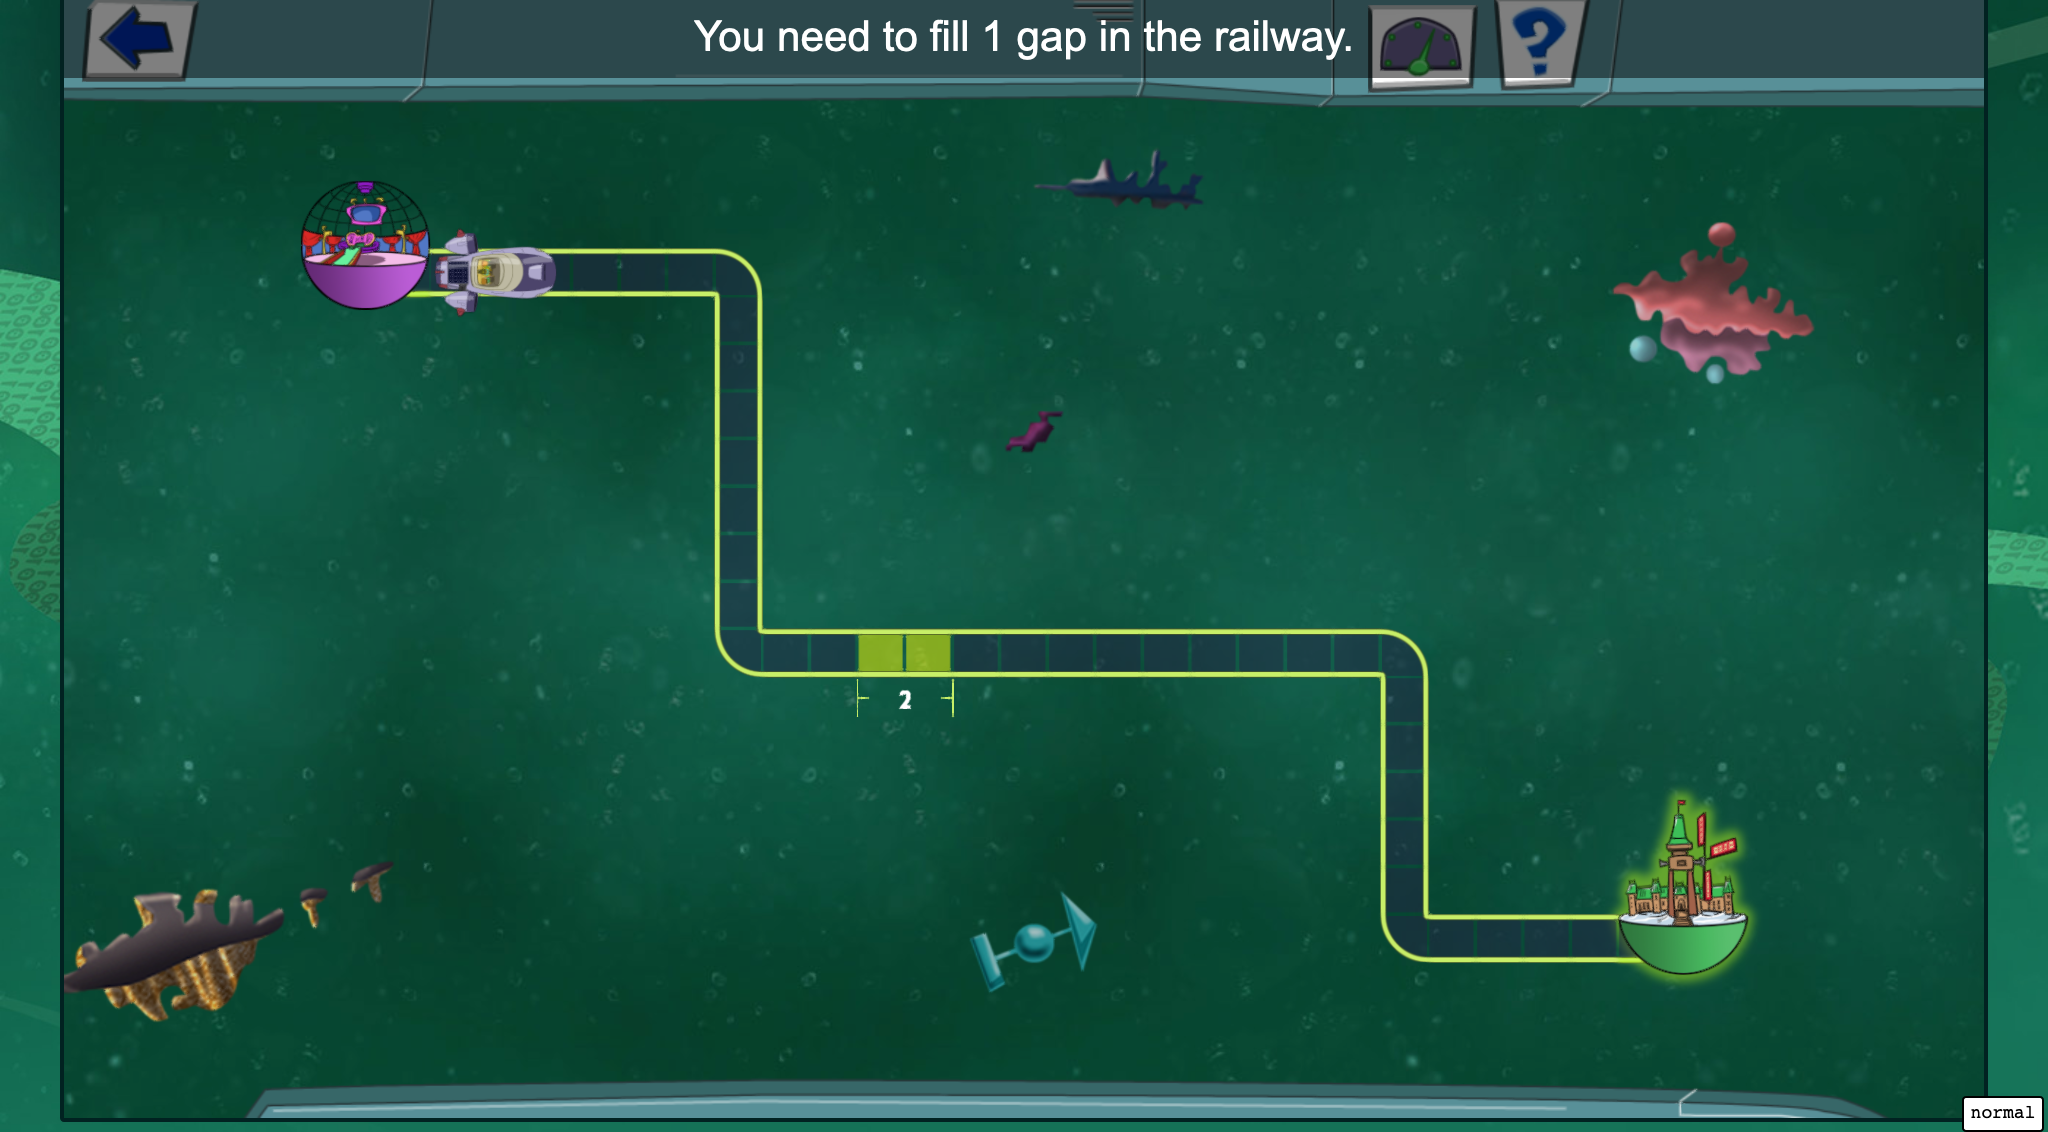 Railway Hero game play - the game is a top-down 2D puzzle game in which players need to fill gaps in railway tracks in a futuristic setting